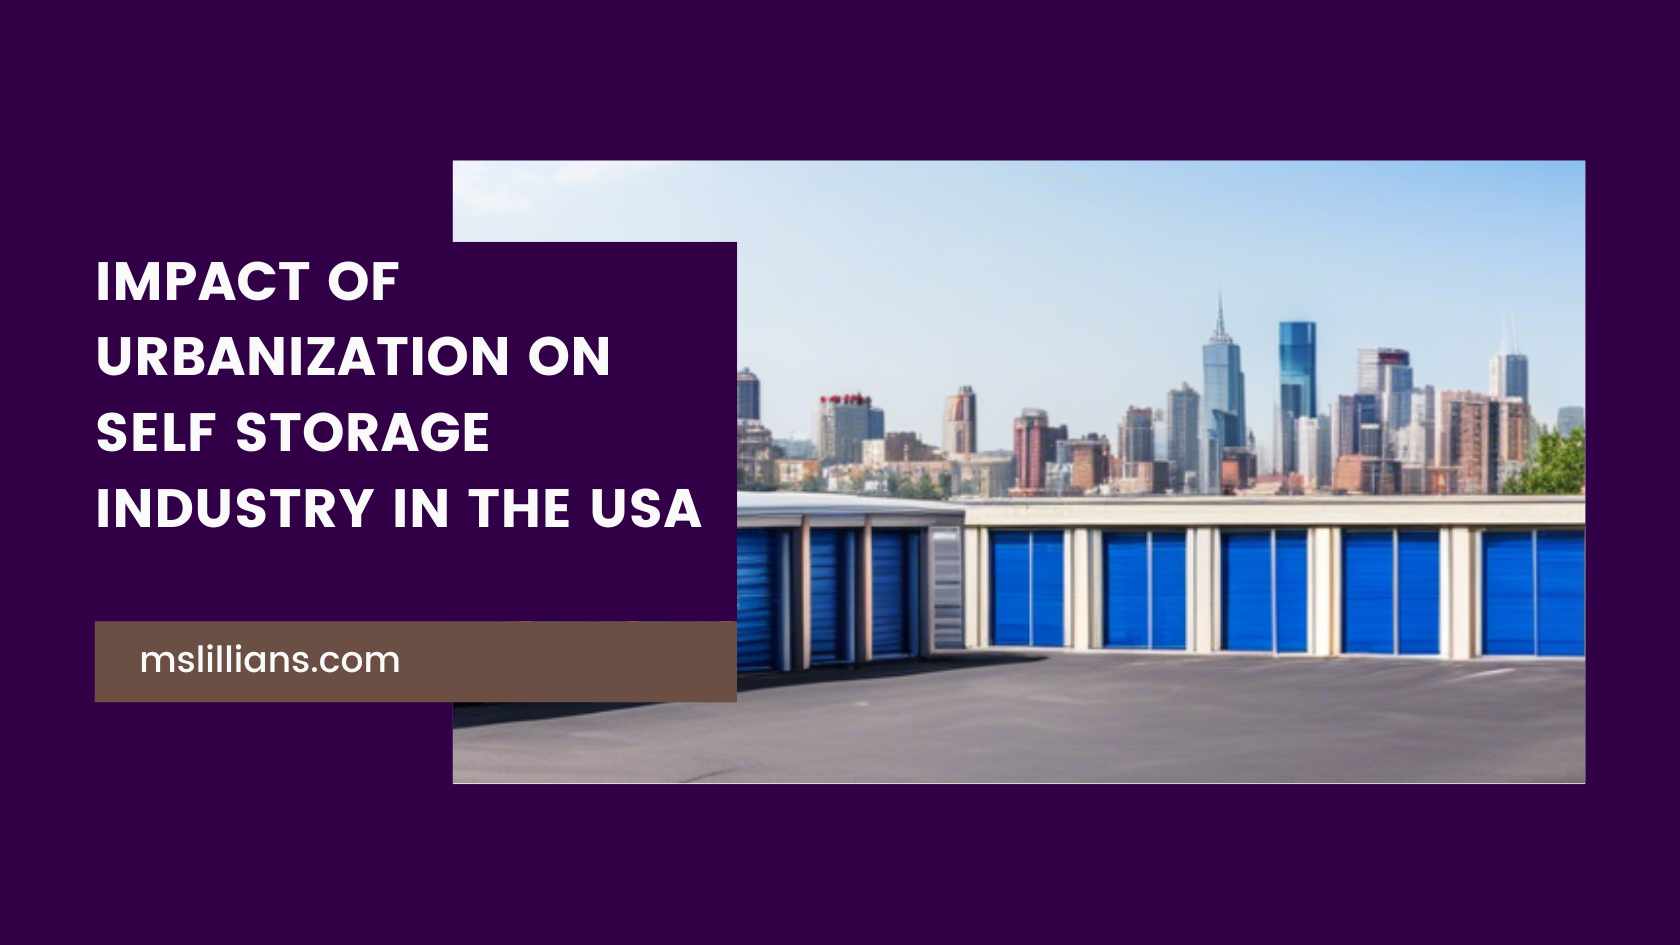 Impact of Urbanization on Self Storage Industry in the USA - Ms lillian's